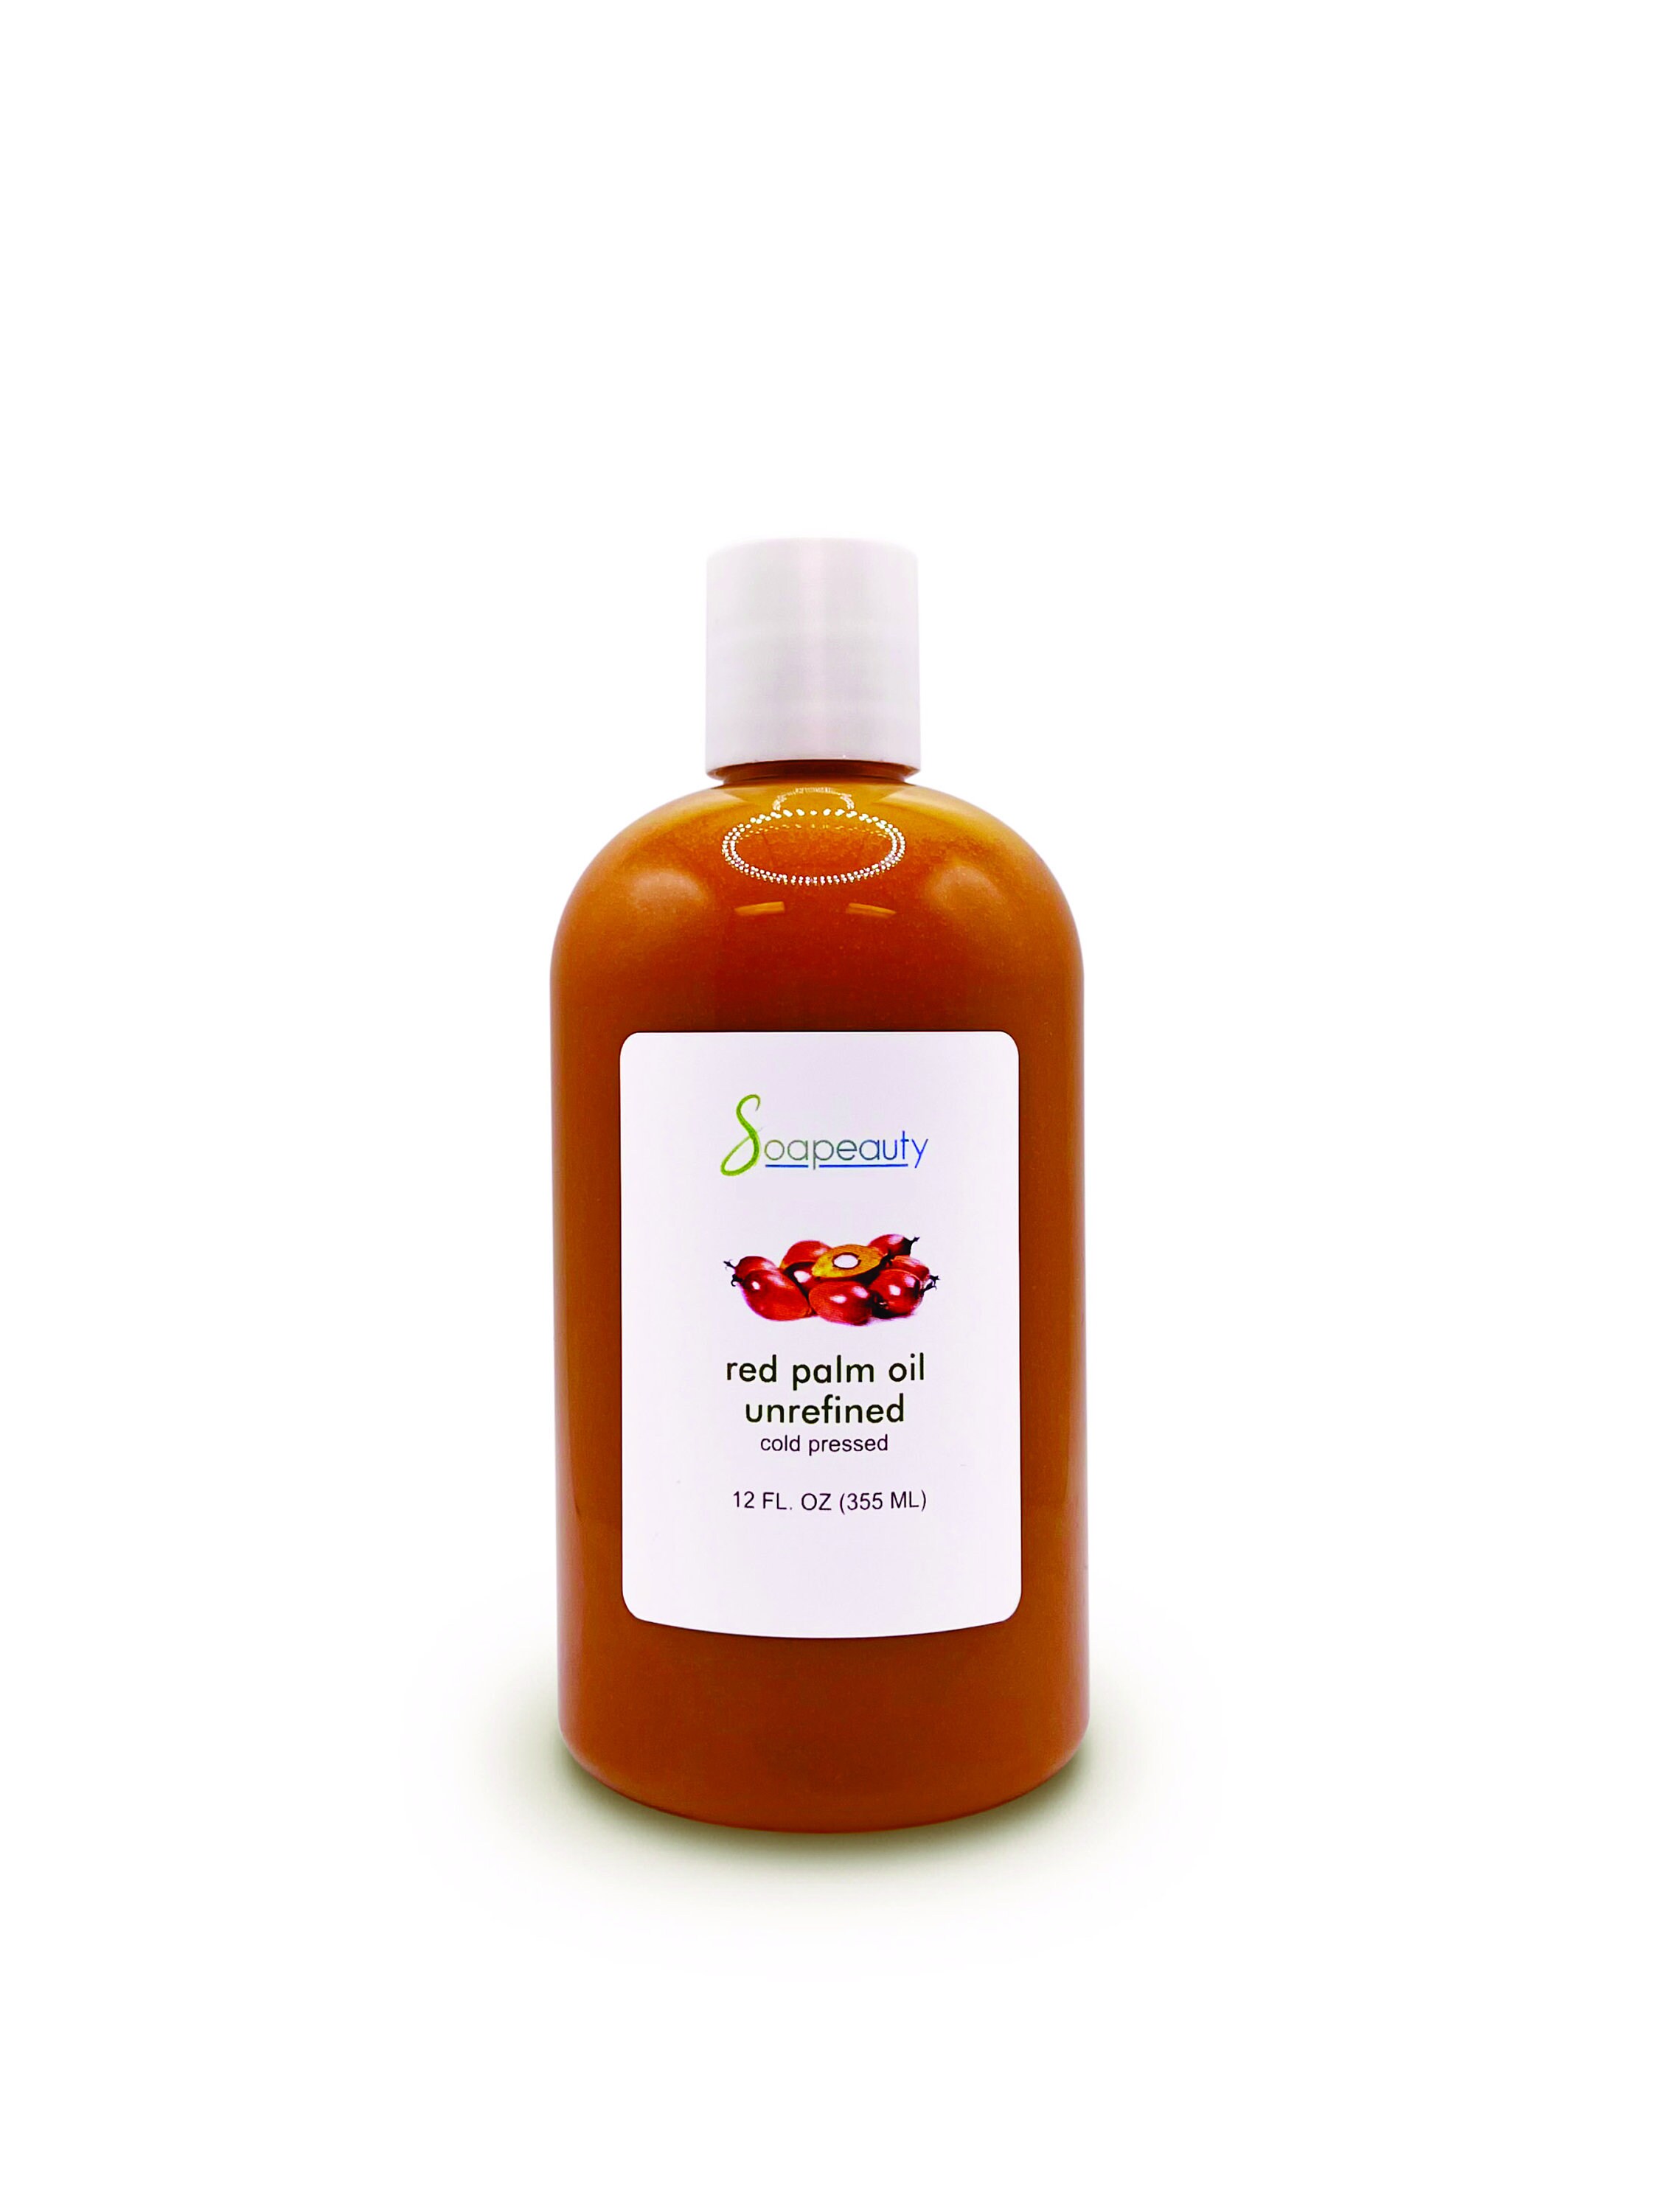 Super Fruit Blend in Glycerin - 3438 - Botanical Extracts Manufacturing